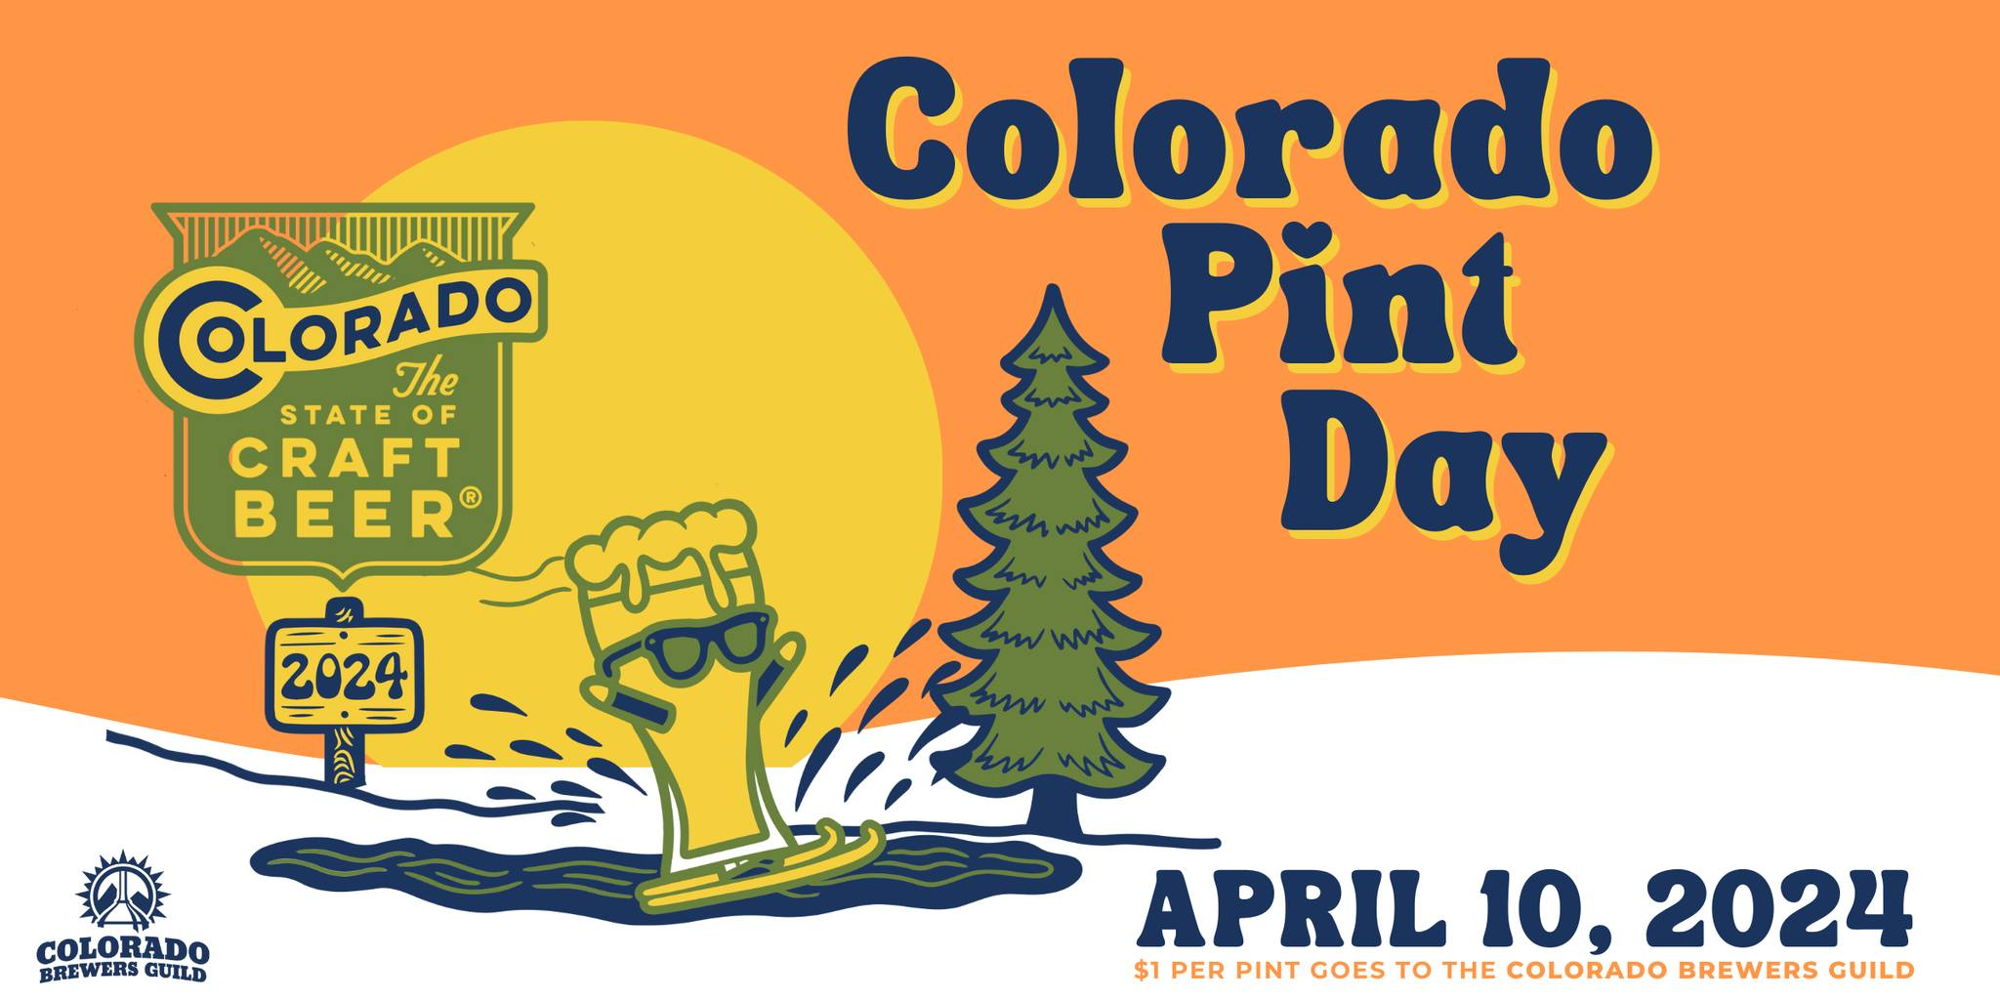 Colorado Pint Day promotional image